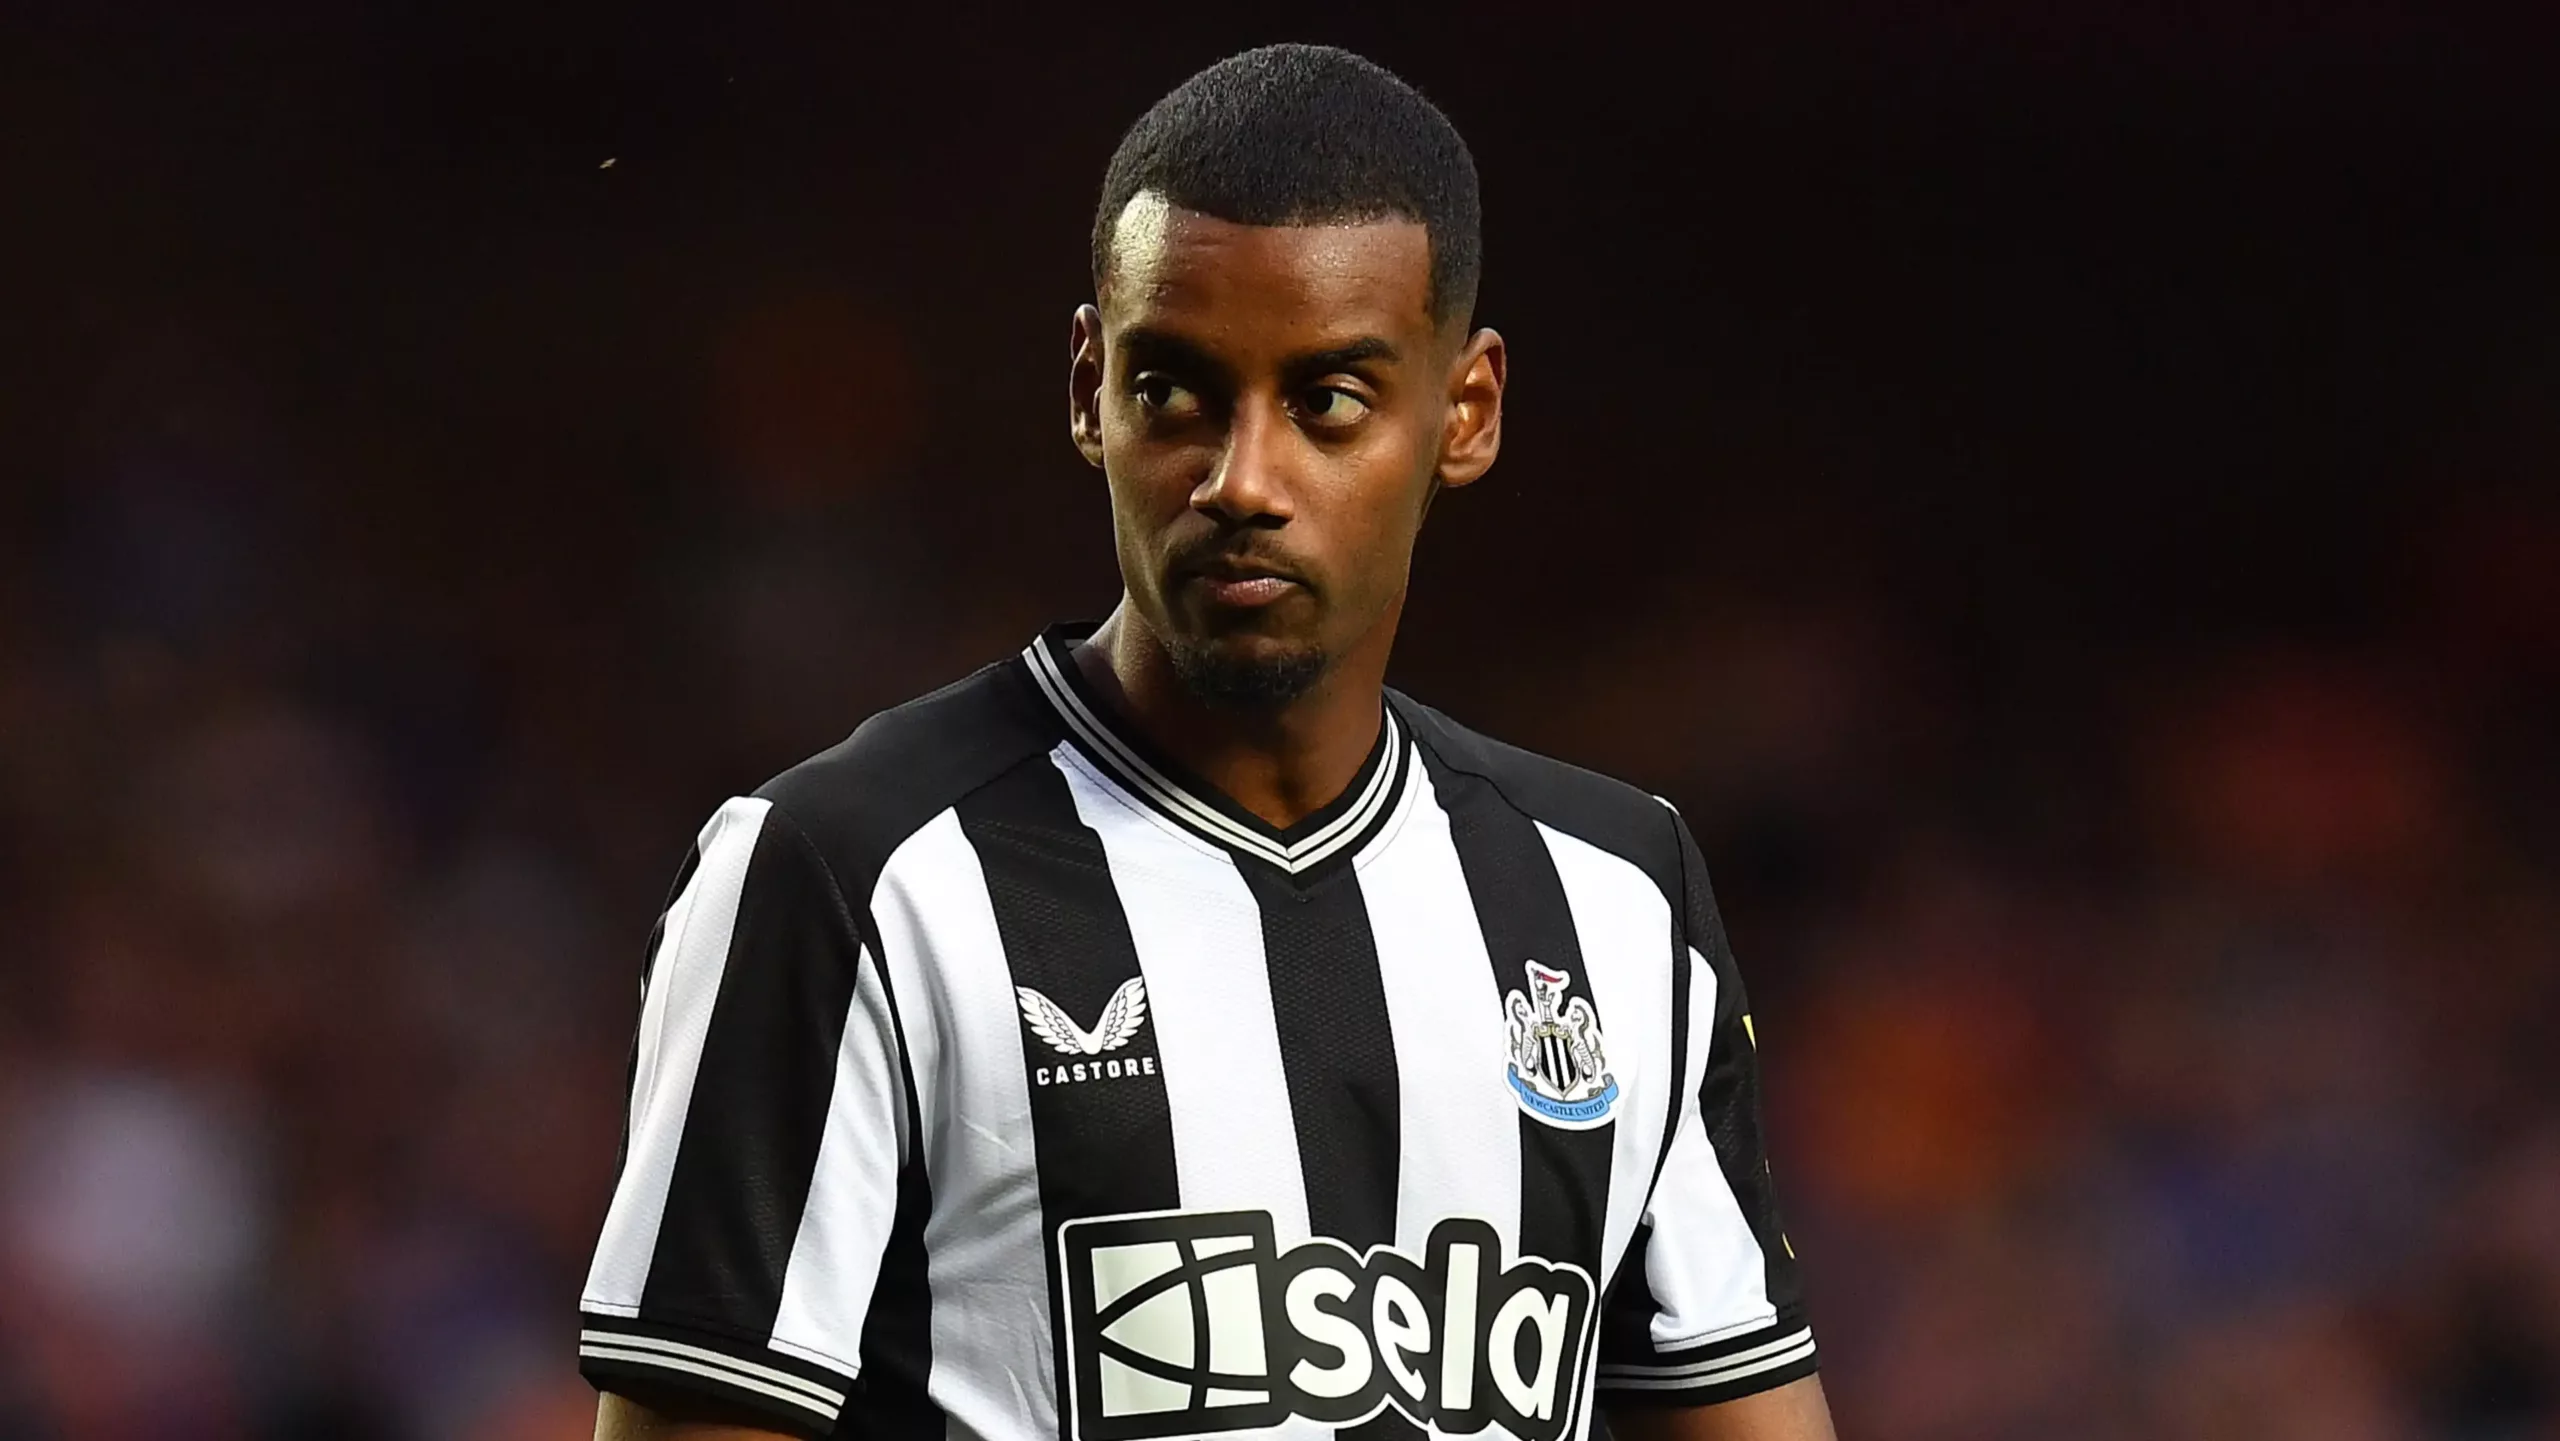 Alexander Isak, the forward for Newcastle, is currently priced at £7.6m and stands as the 7th most selected forward